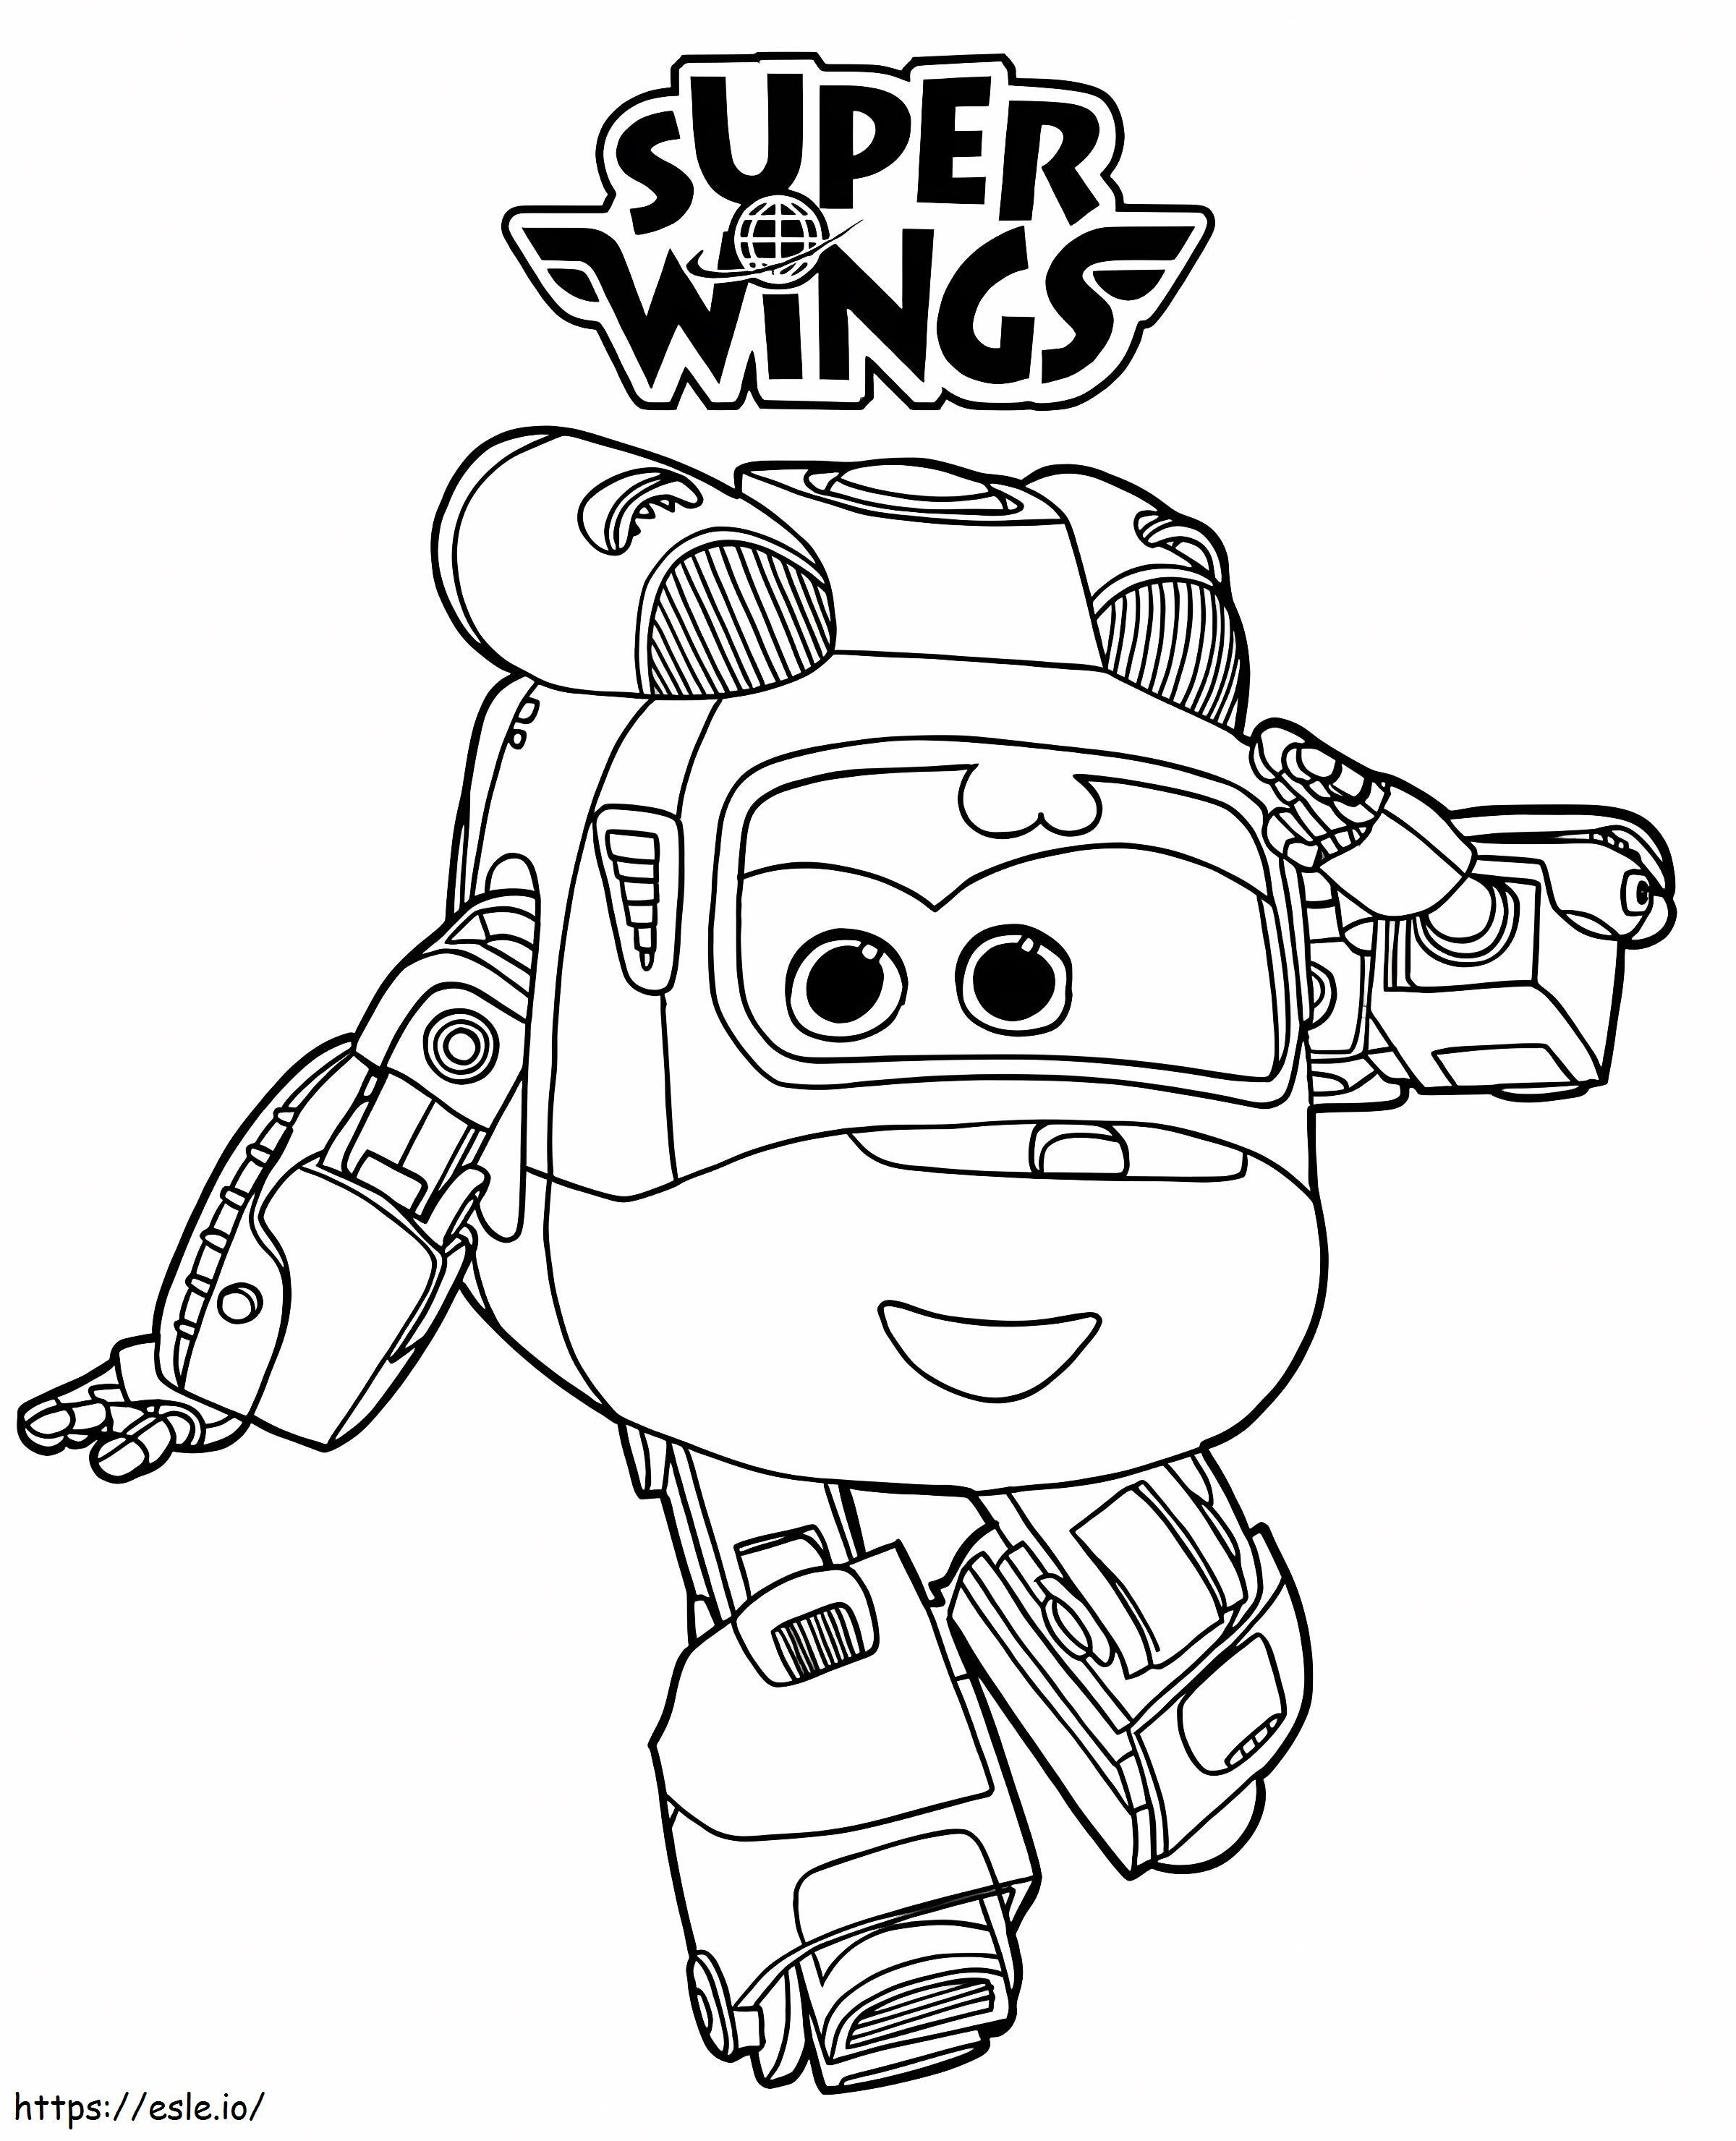 Dizzy Super Wings 2 coloring page